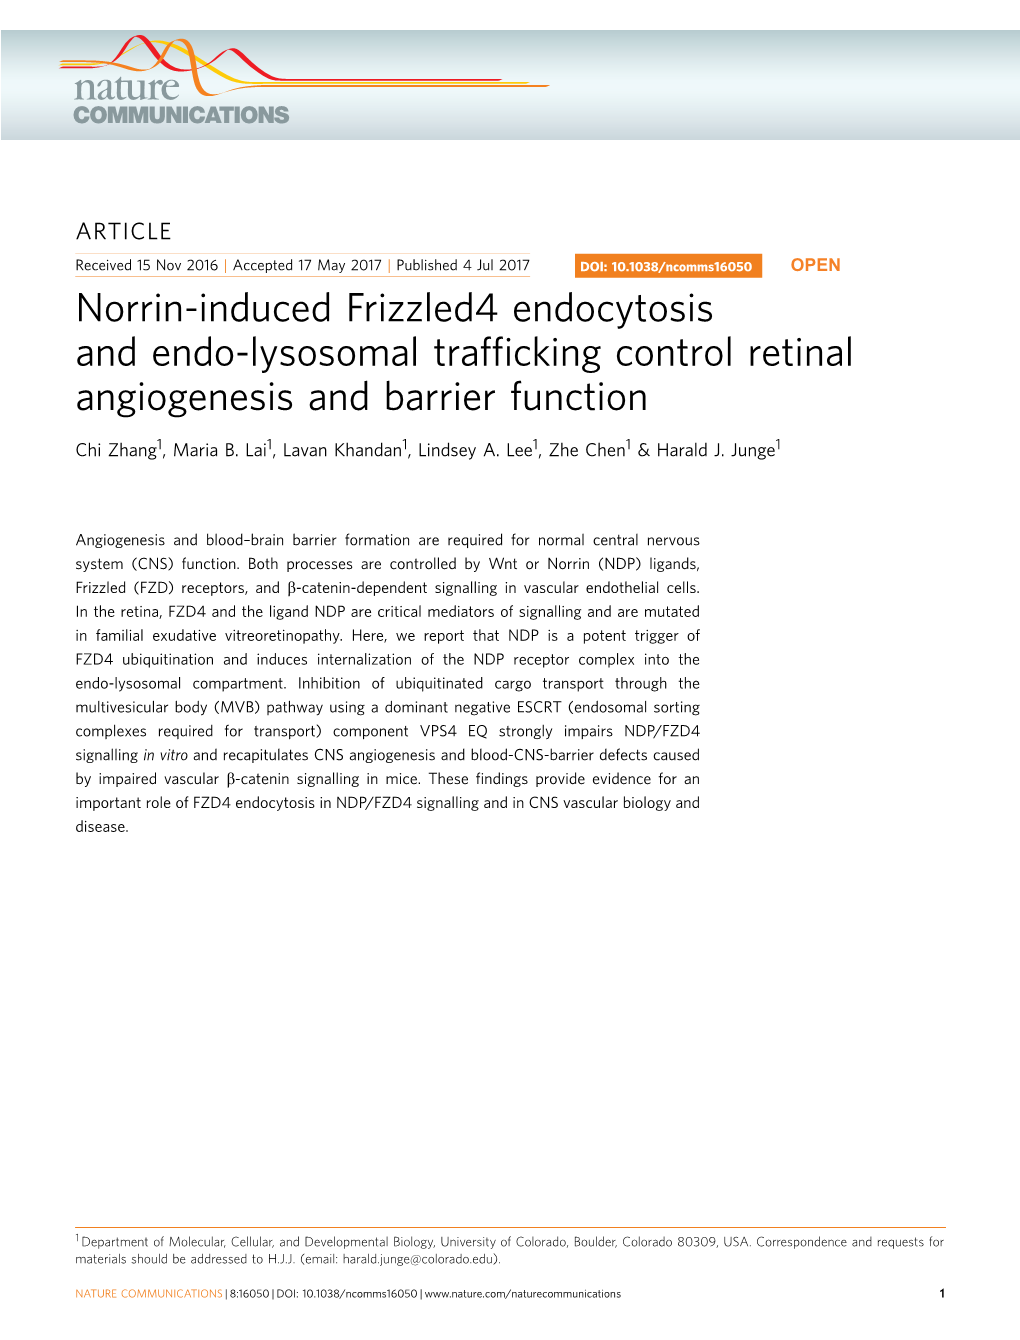 Norrin-Induced Frizzled4 Endocytosis and Endo-Lysosomal Trafficking